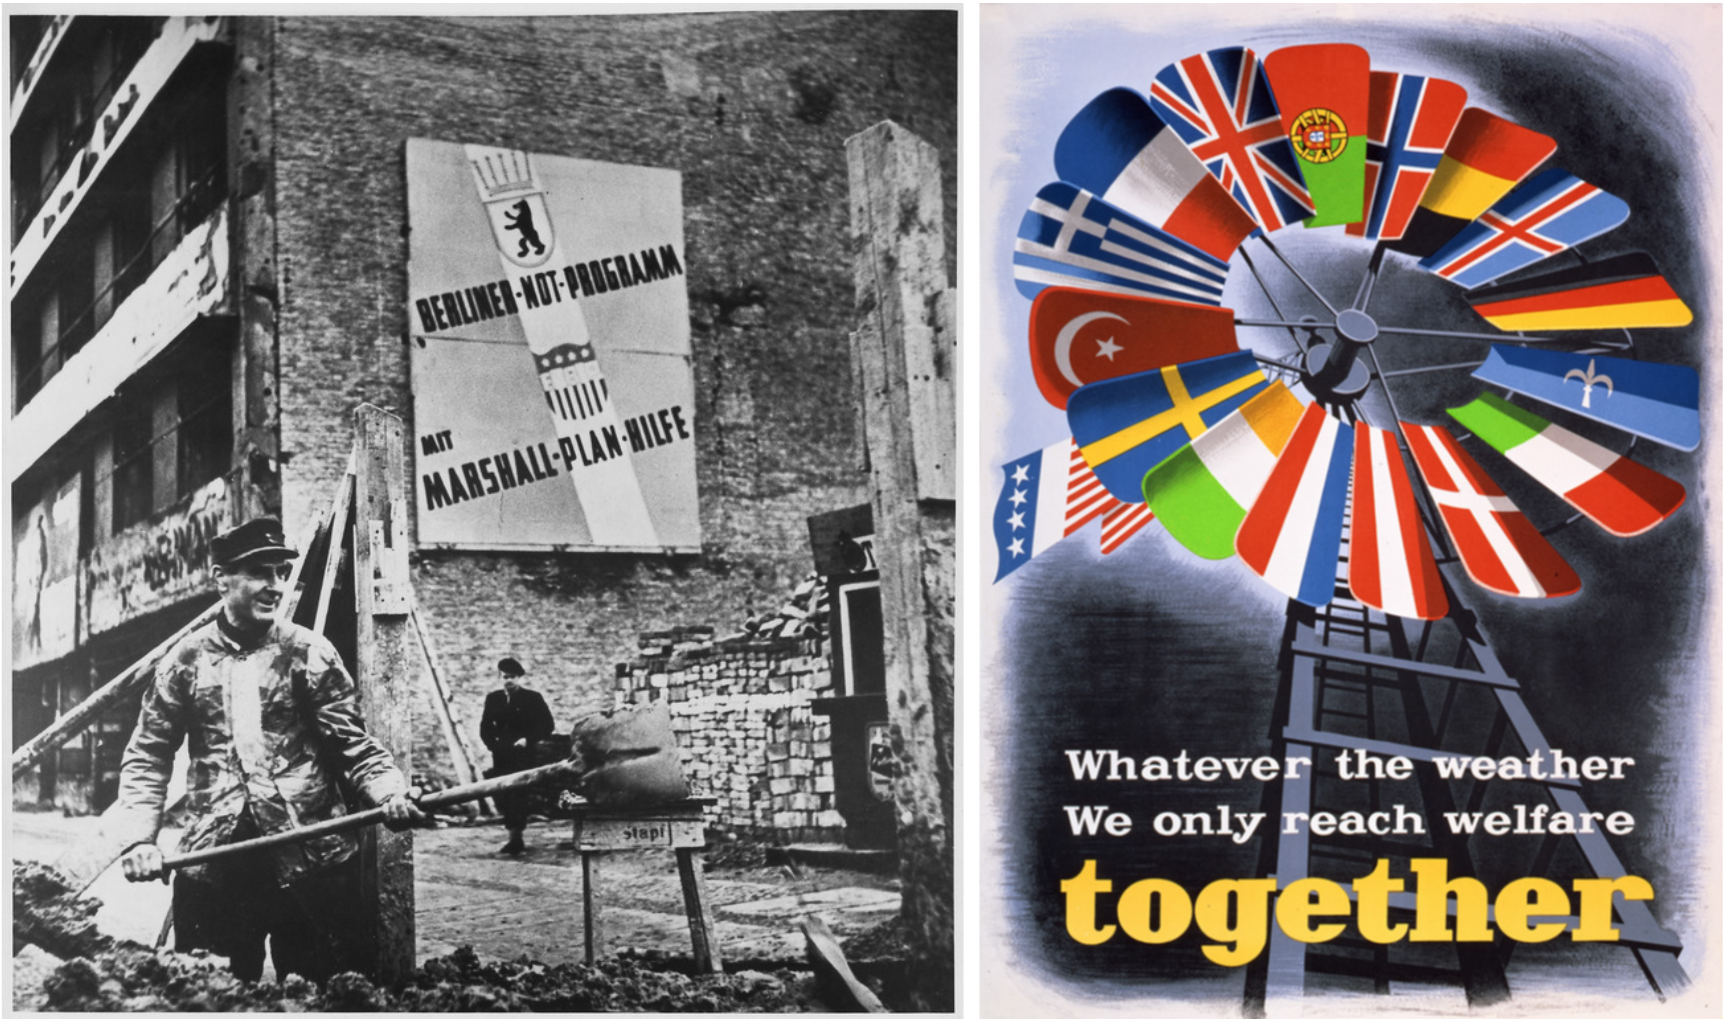 Reconstruction efforts in West Germany, 1948. Sign reads “Berlin Emergency Program, with Marshall Plan help.” (left) The U.S.-Economic Cooperation Administration created numerous posters to promote the Marshall Plan in Europe. This one, depicting the flags of various Western European countries receiving Marshall Plan aid, was produced in 1950 (right).